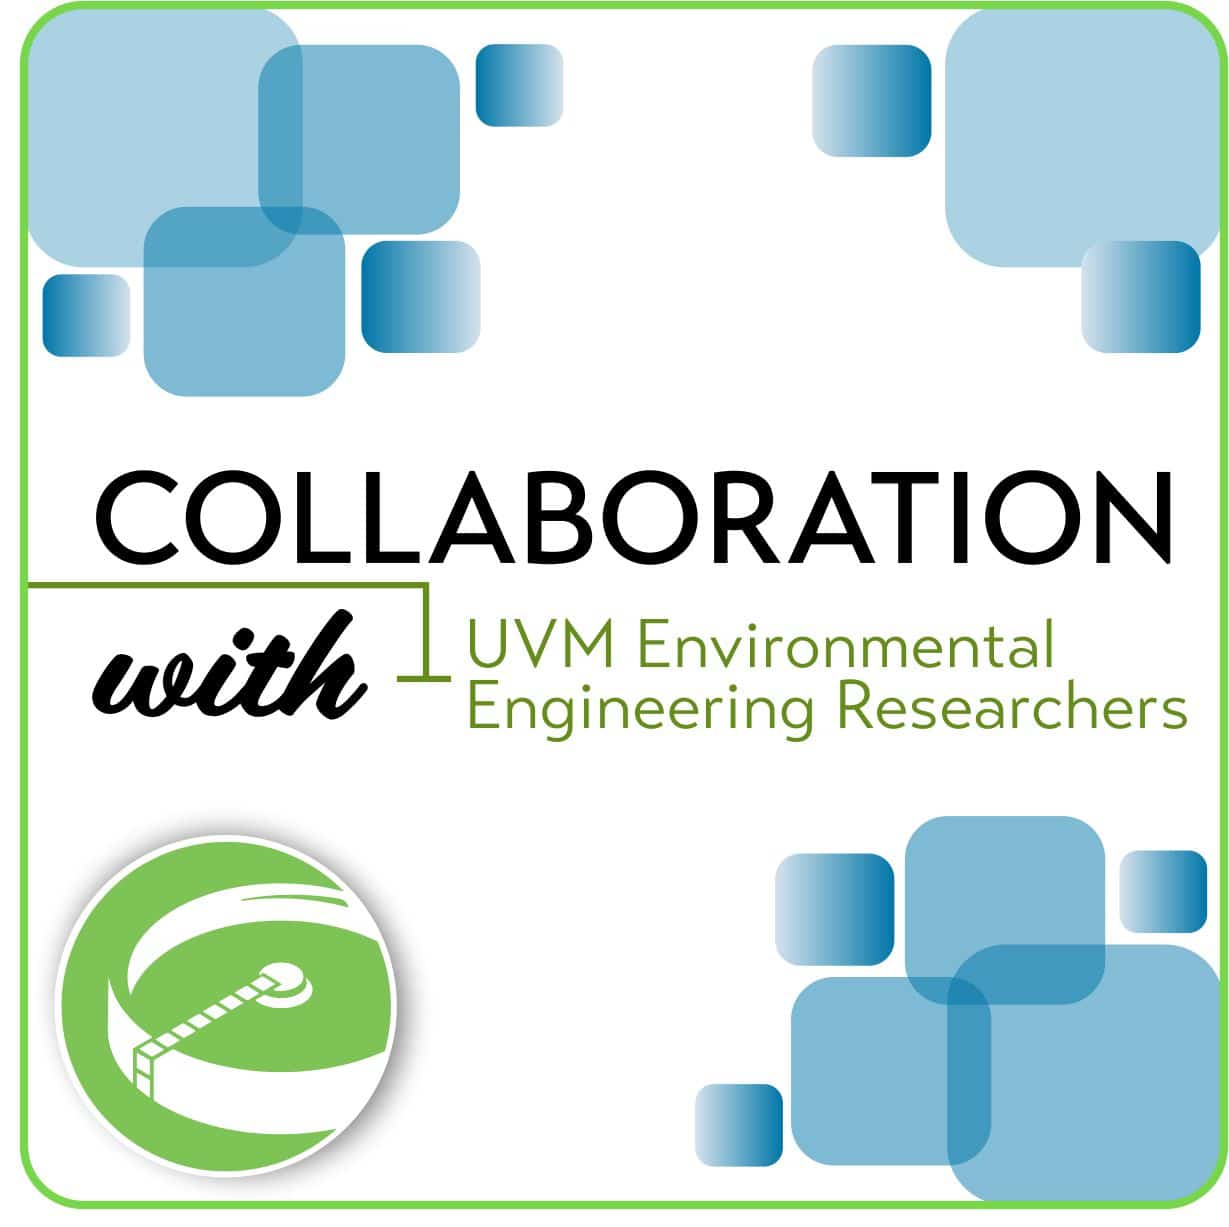 A graphic with the words "Collaboration with UVM Environmental Engineering Researchers" on it that includes faded blue boxes in a pattern and a wastewater treatment icon.